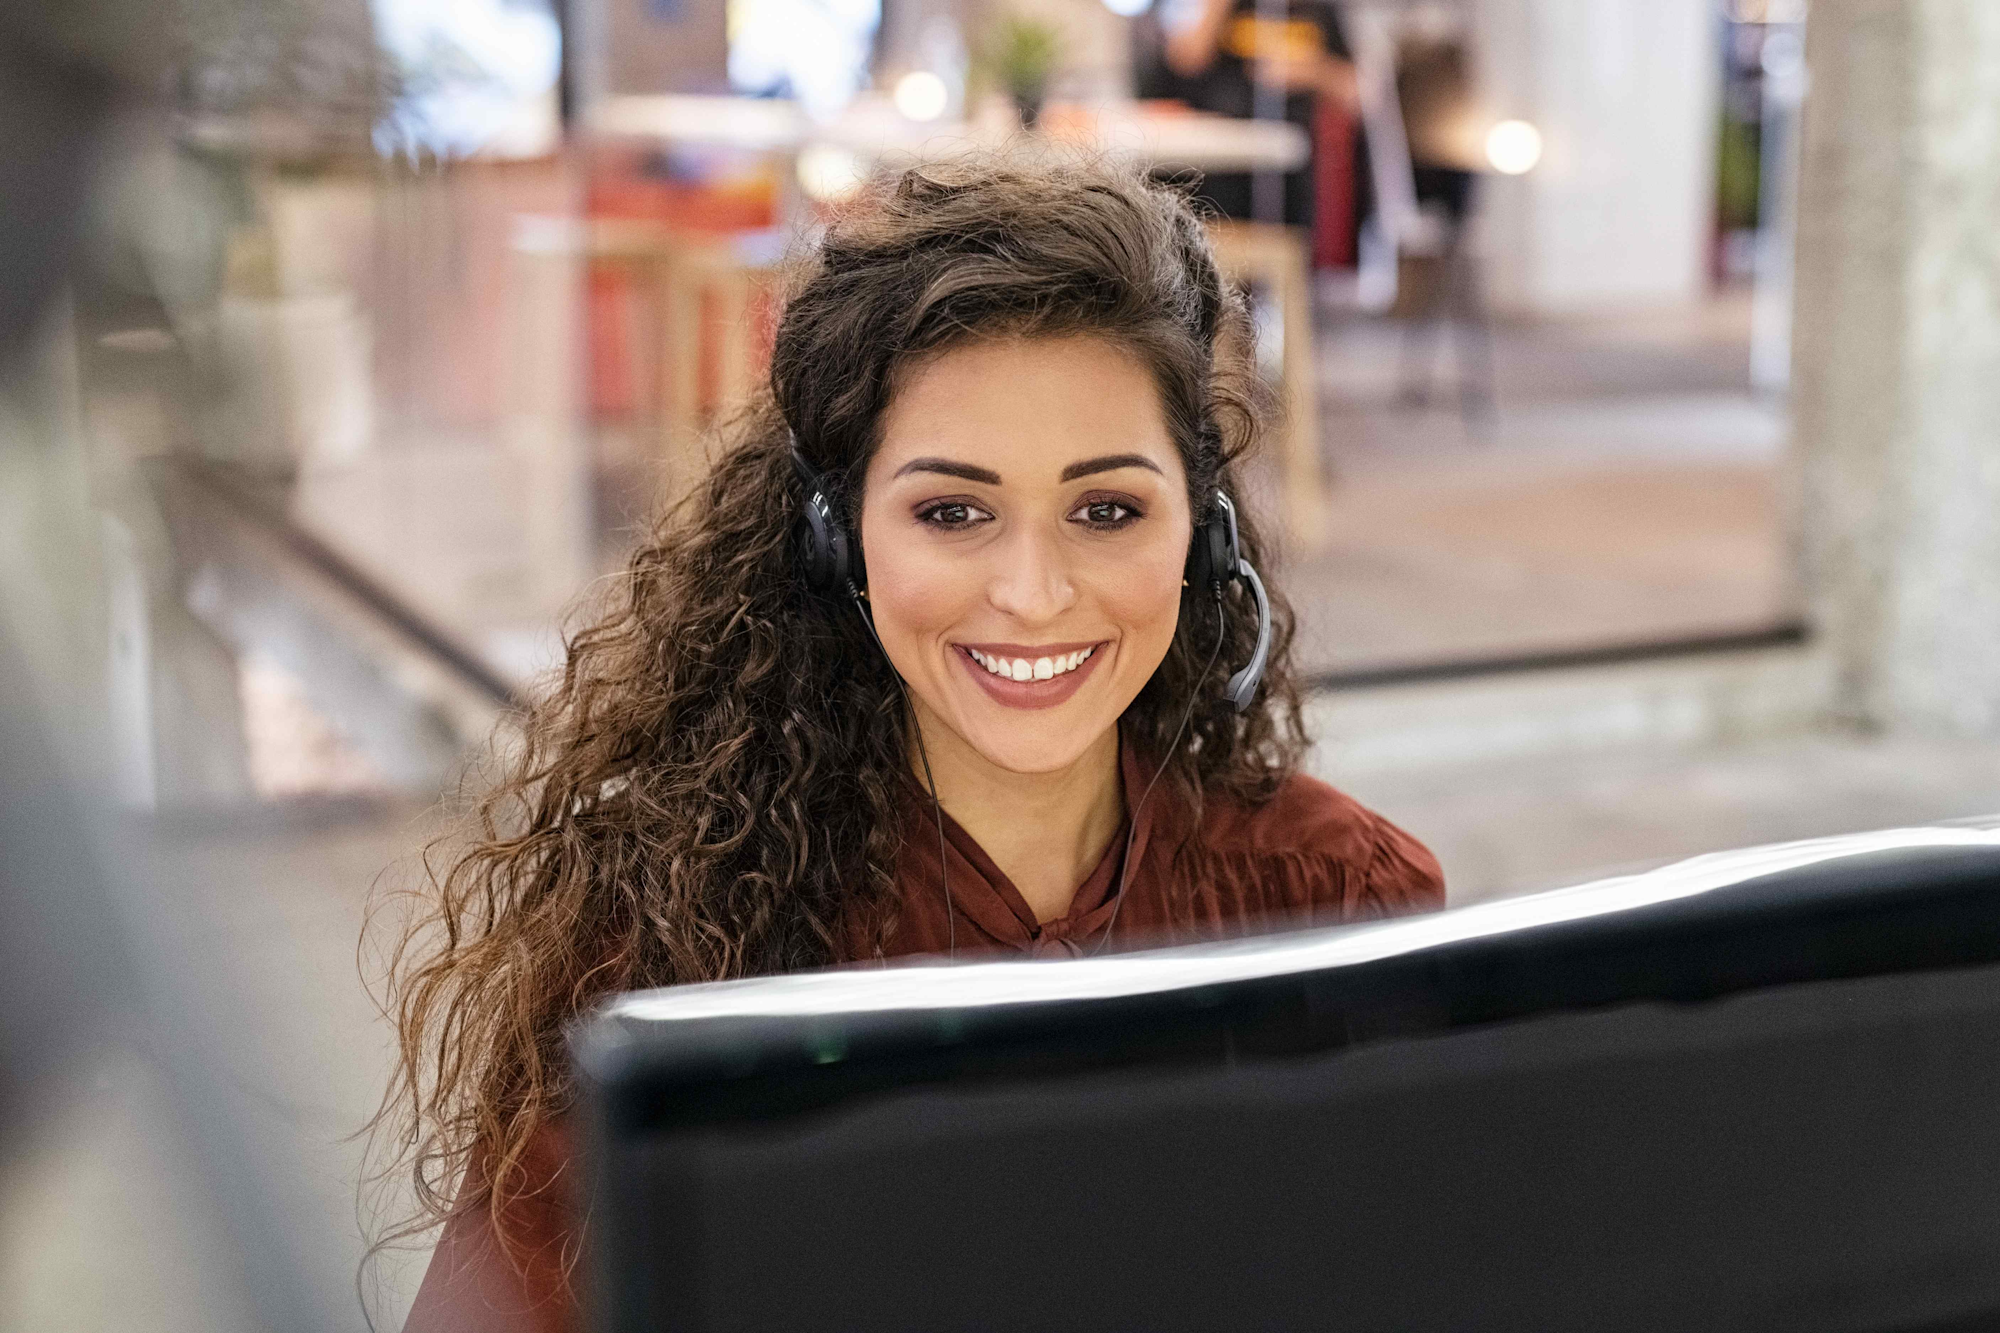 Customer Service Female Representative with Headset Smiling